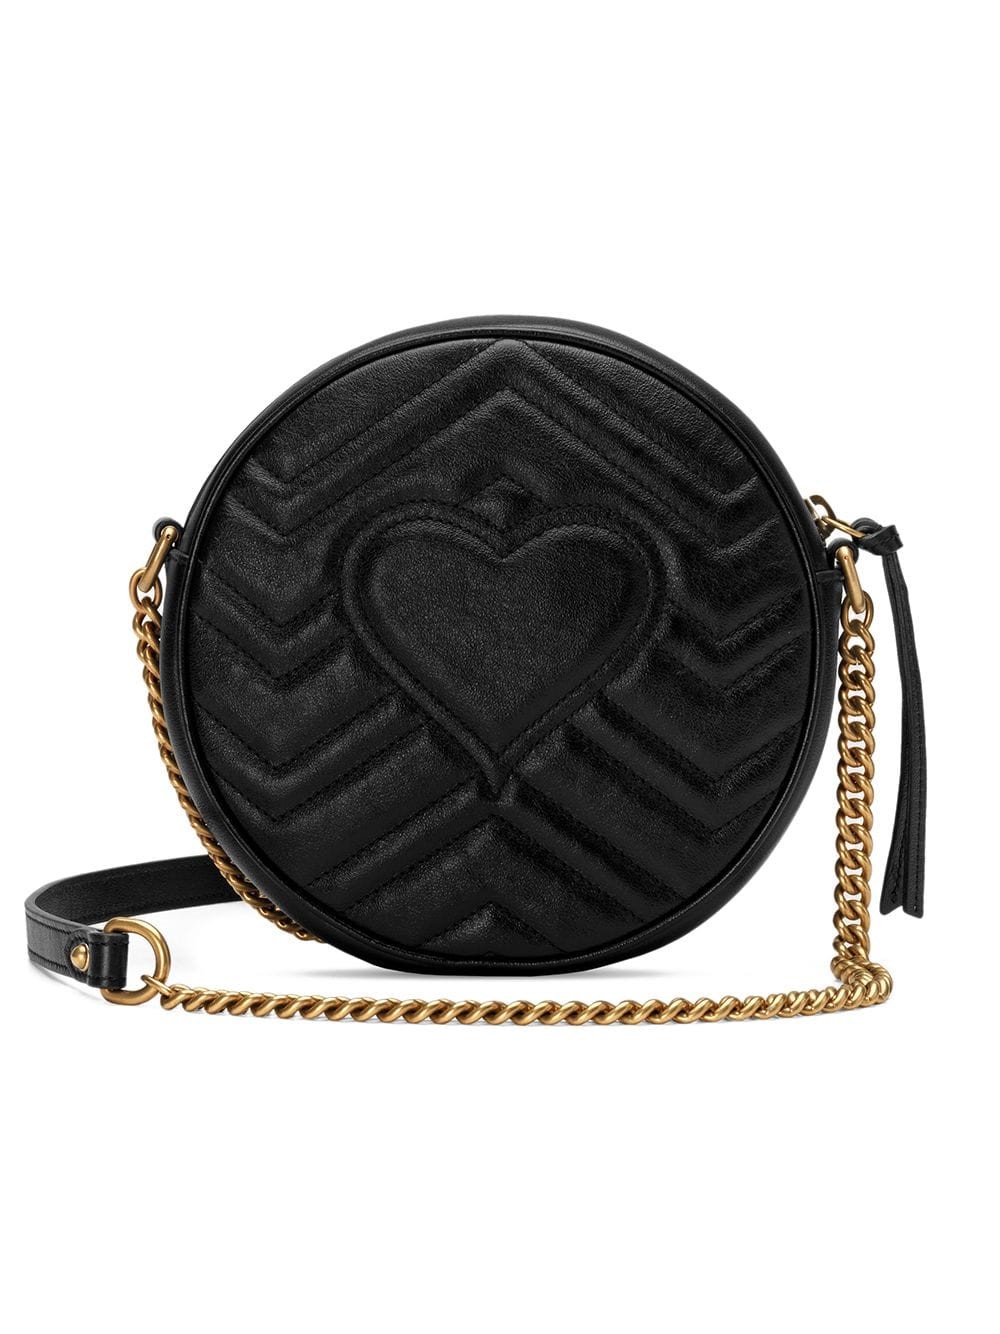 gucci GG MARMONT ROUND BAG available on www.bagssaleusa.com - 27417